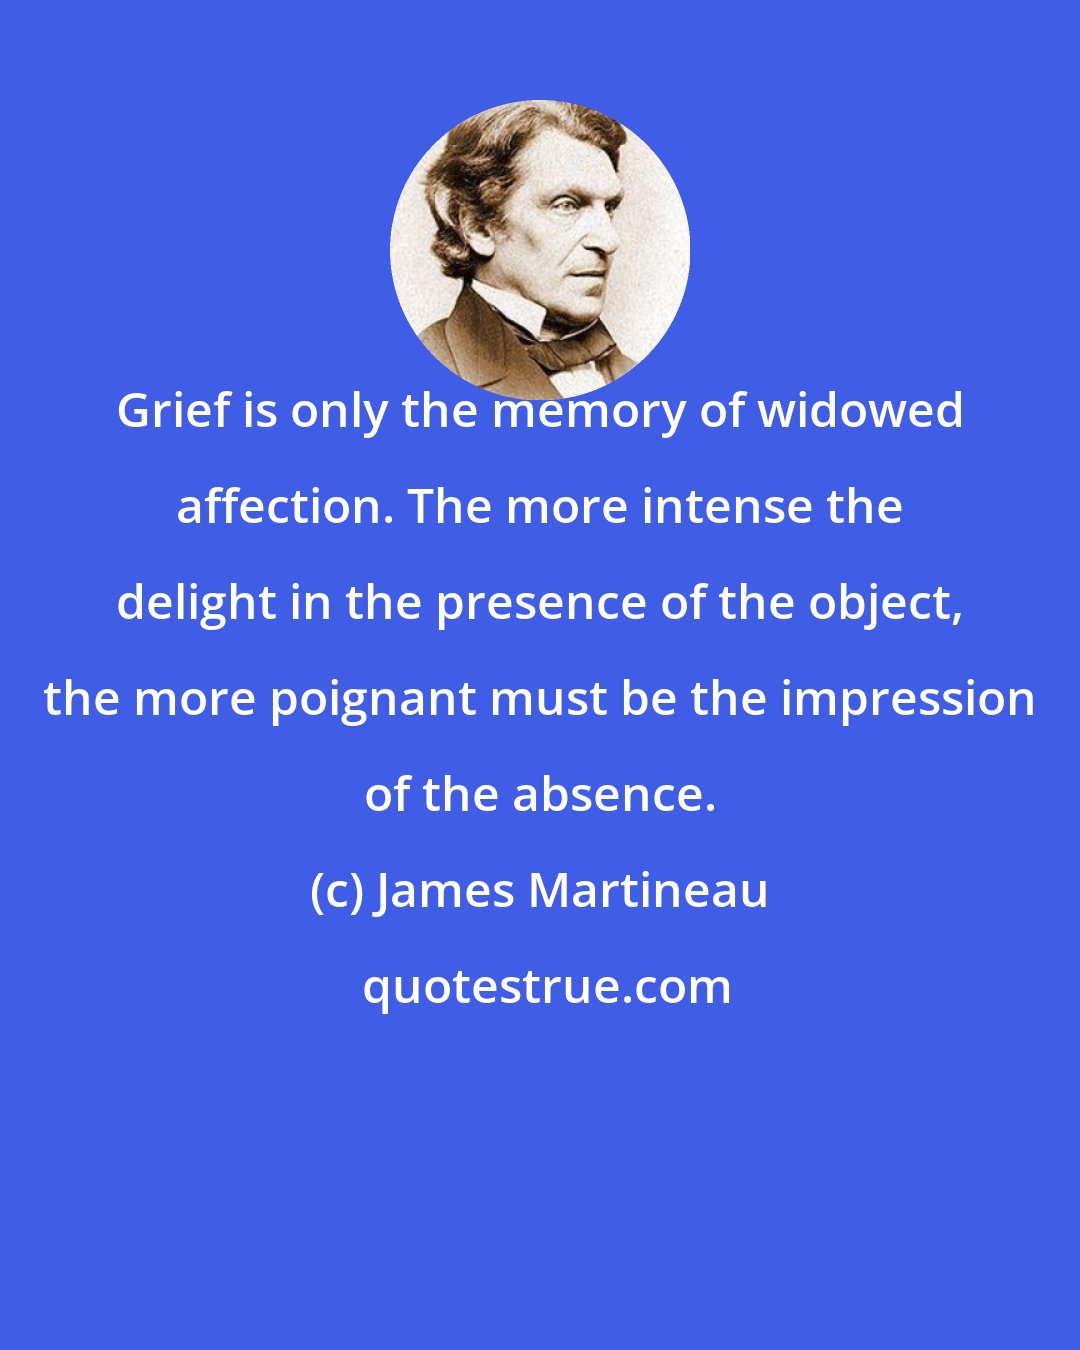 James Martineau: Grief is only the memory of widowed affection. The more intense the delight in the presence of the object, the more poignant must be the impression of the absence.